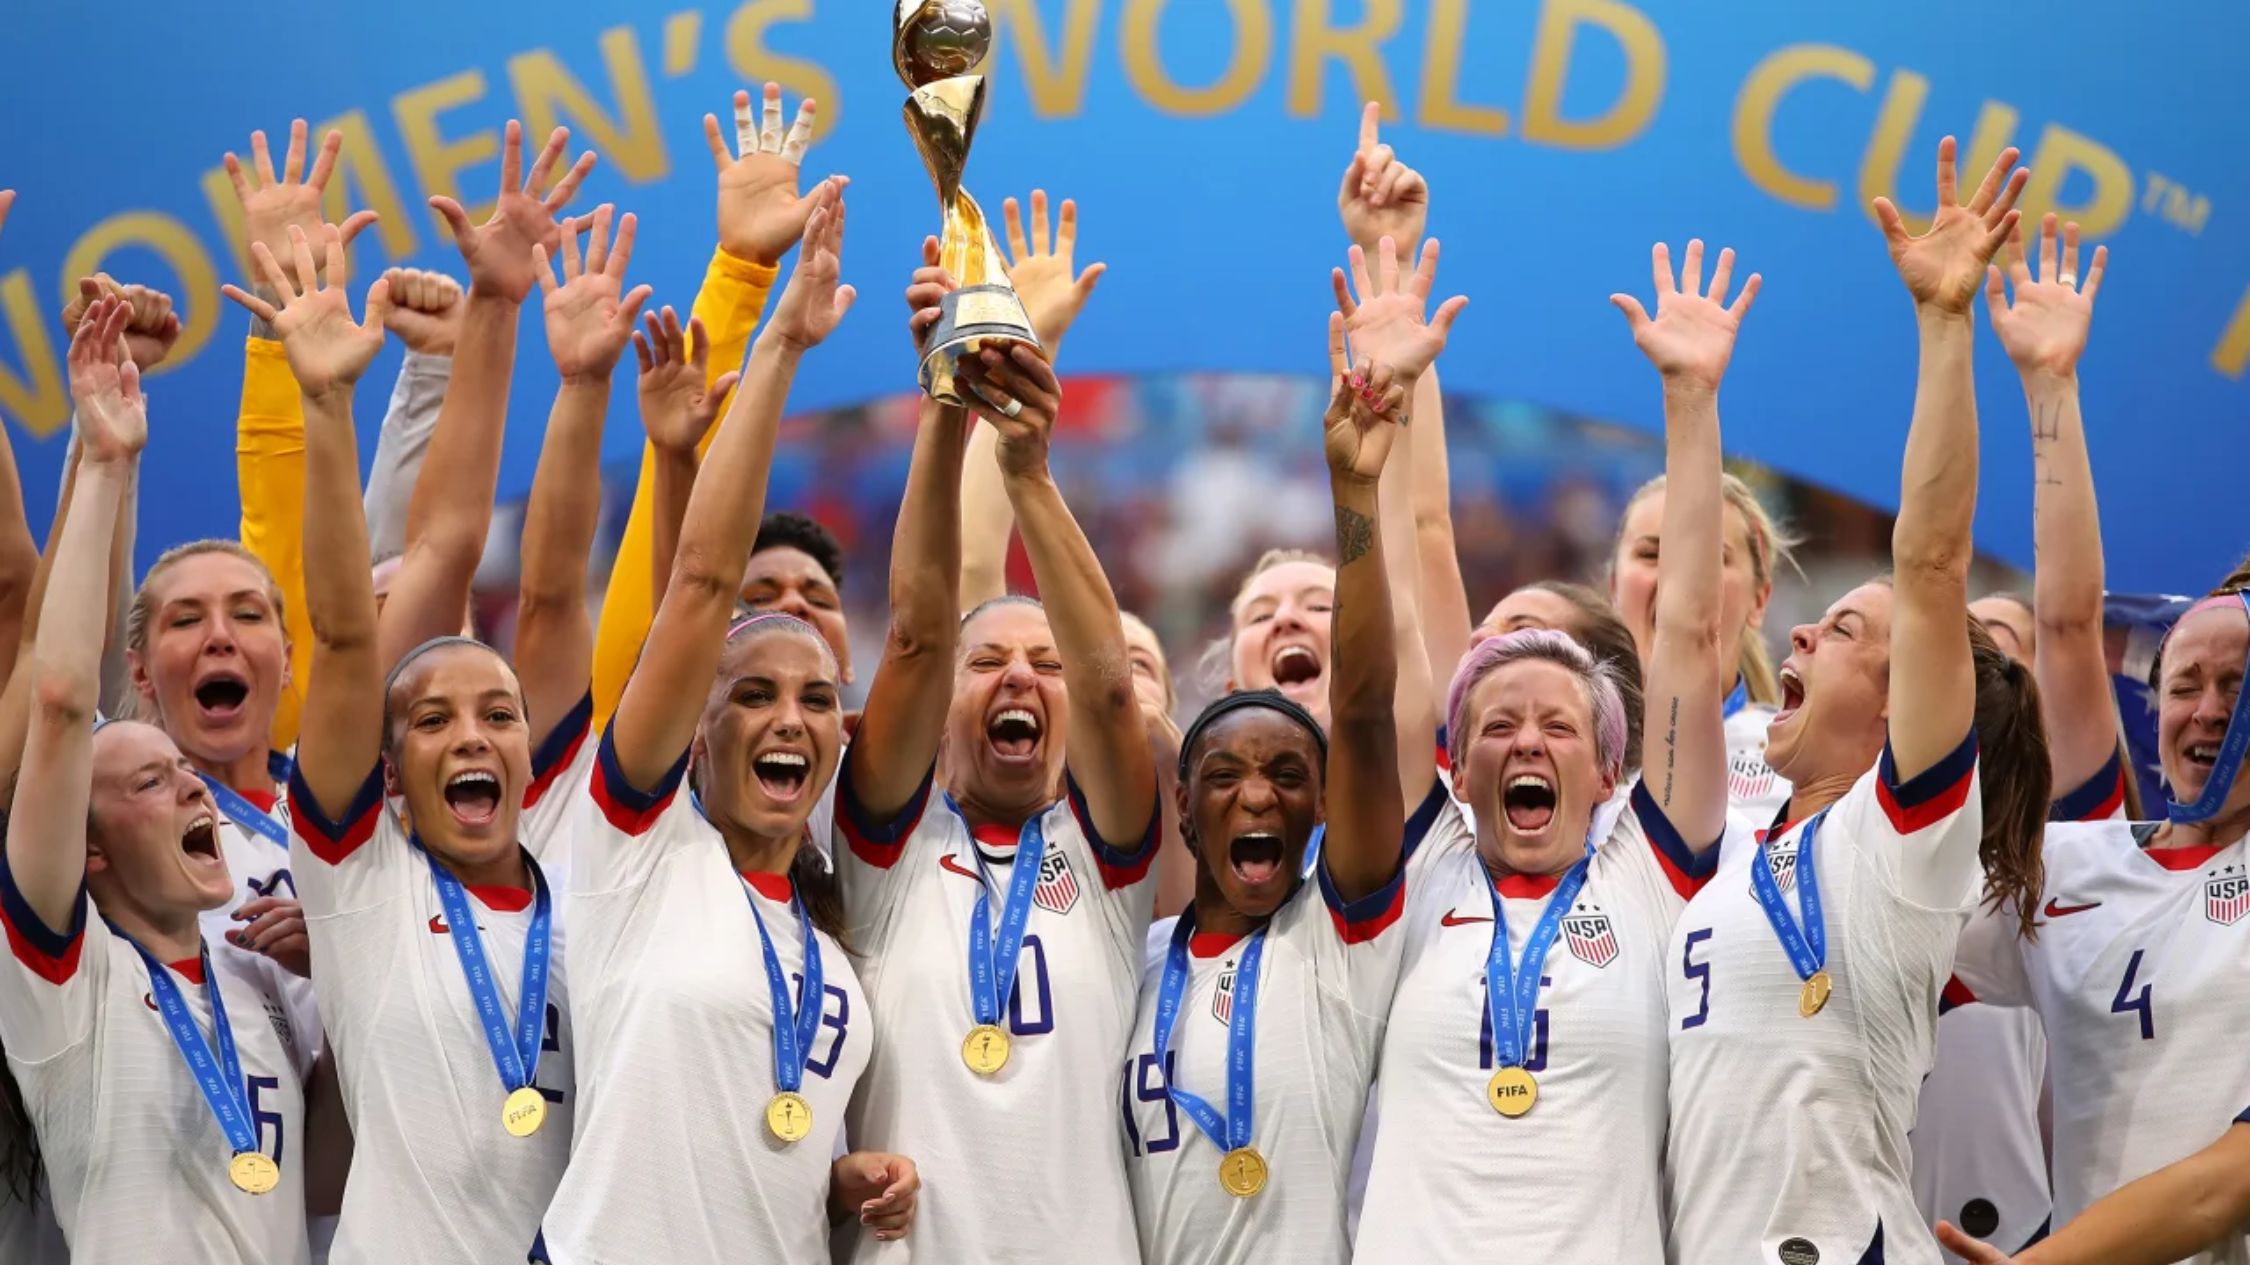 USWNT players celebrate defending their 2019 world title. (Photo: Richard Heathcote/Getty Images)